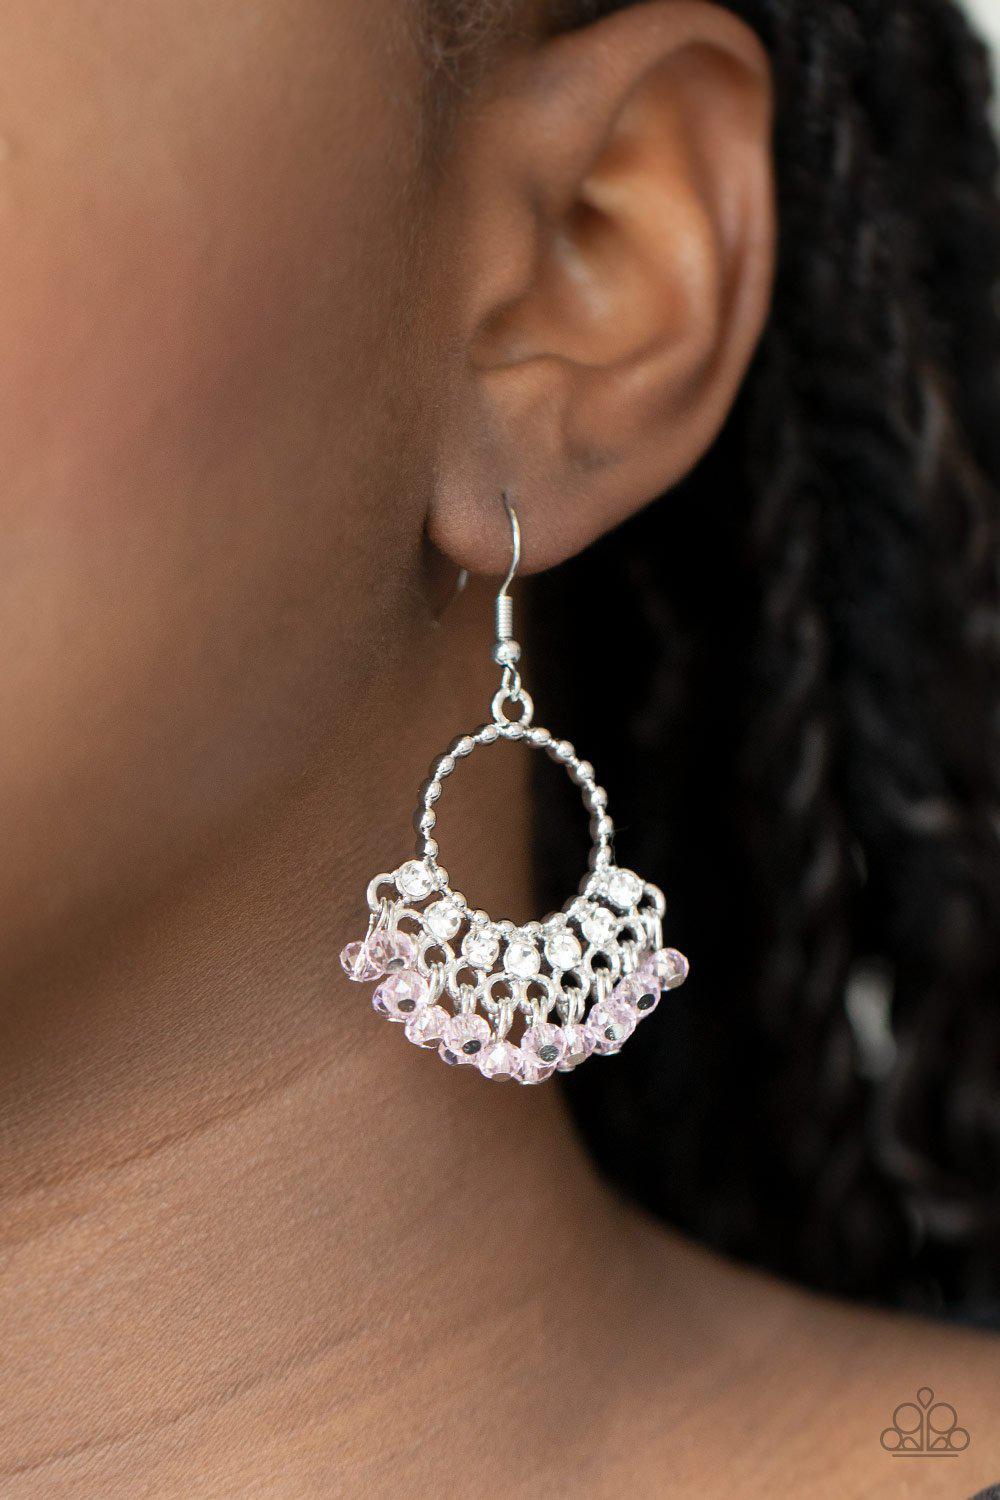 Charmingly Cabaret Pink Earrings - Paparazzi Accessories - lightbox -CarasShop.com - $5 Jewelry by Cara Jewels